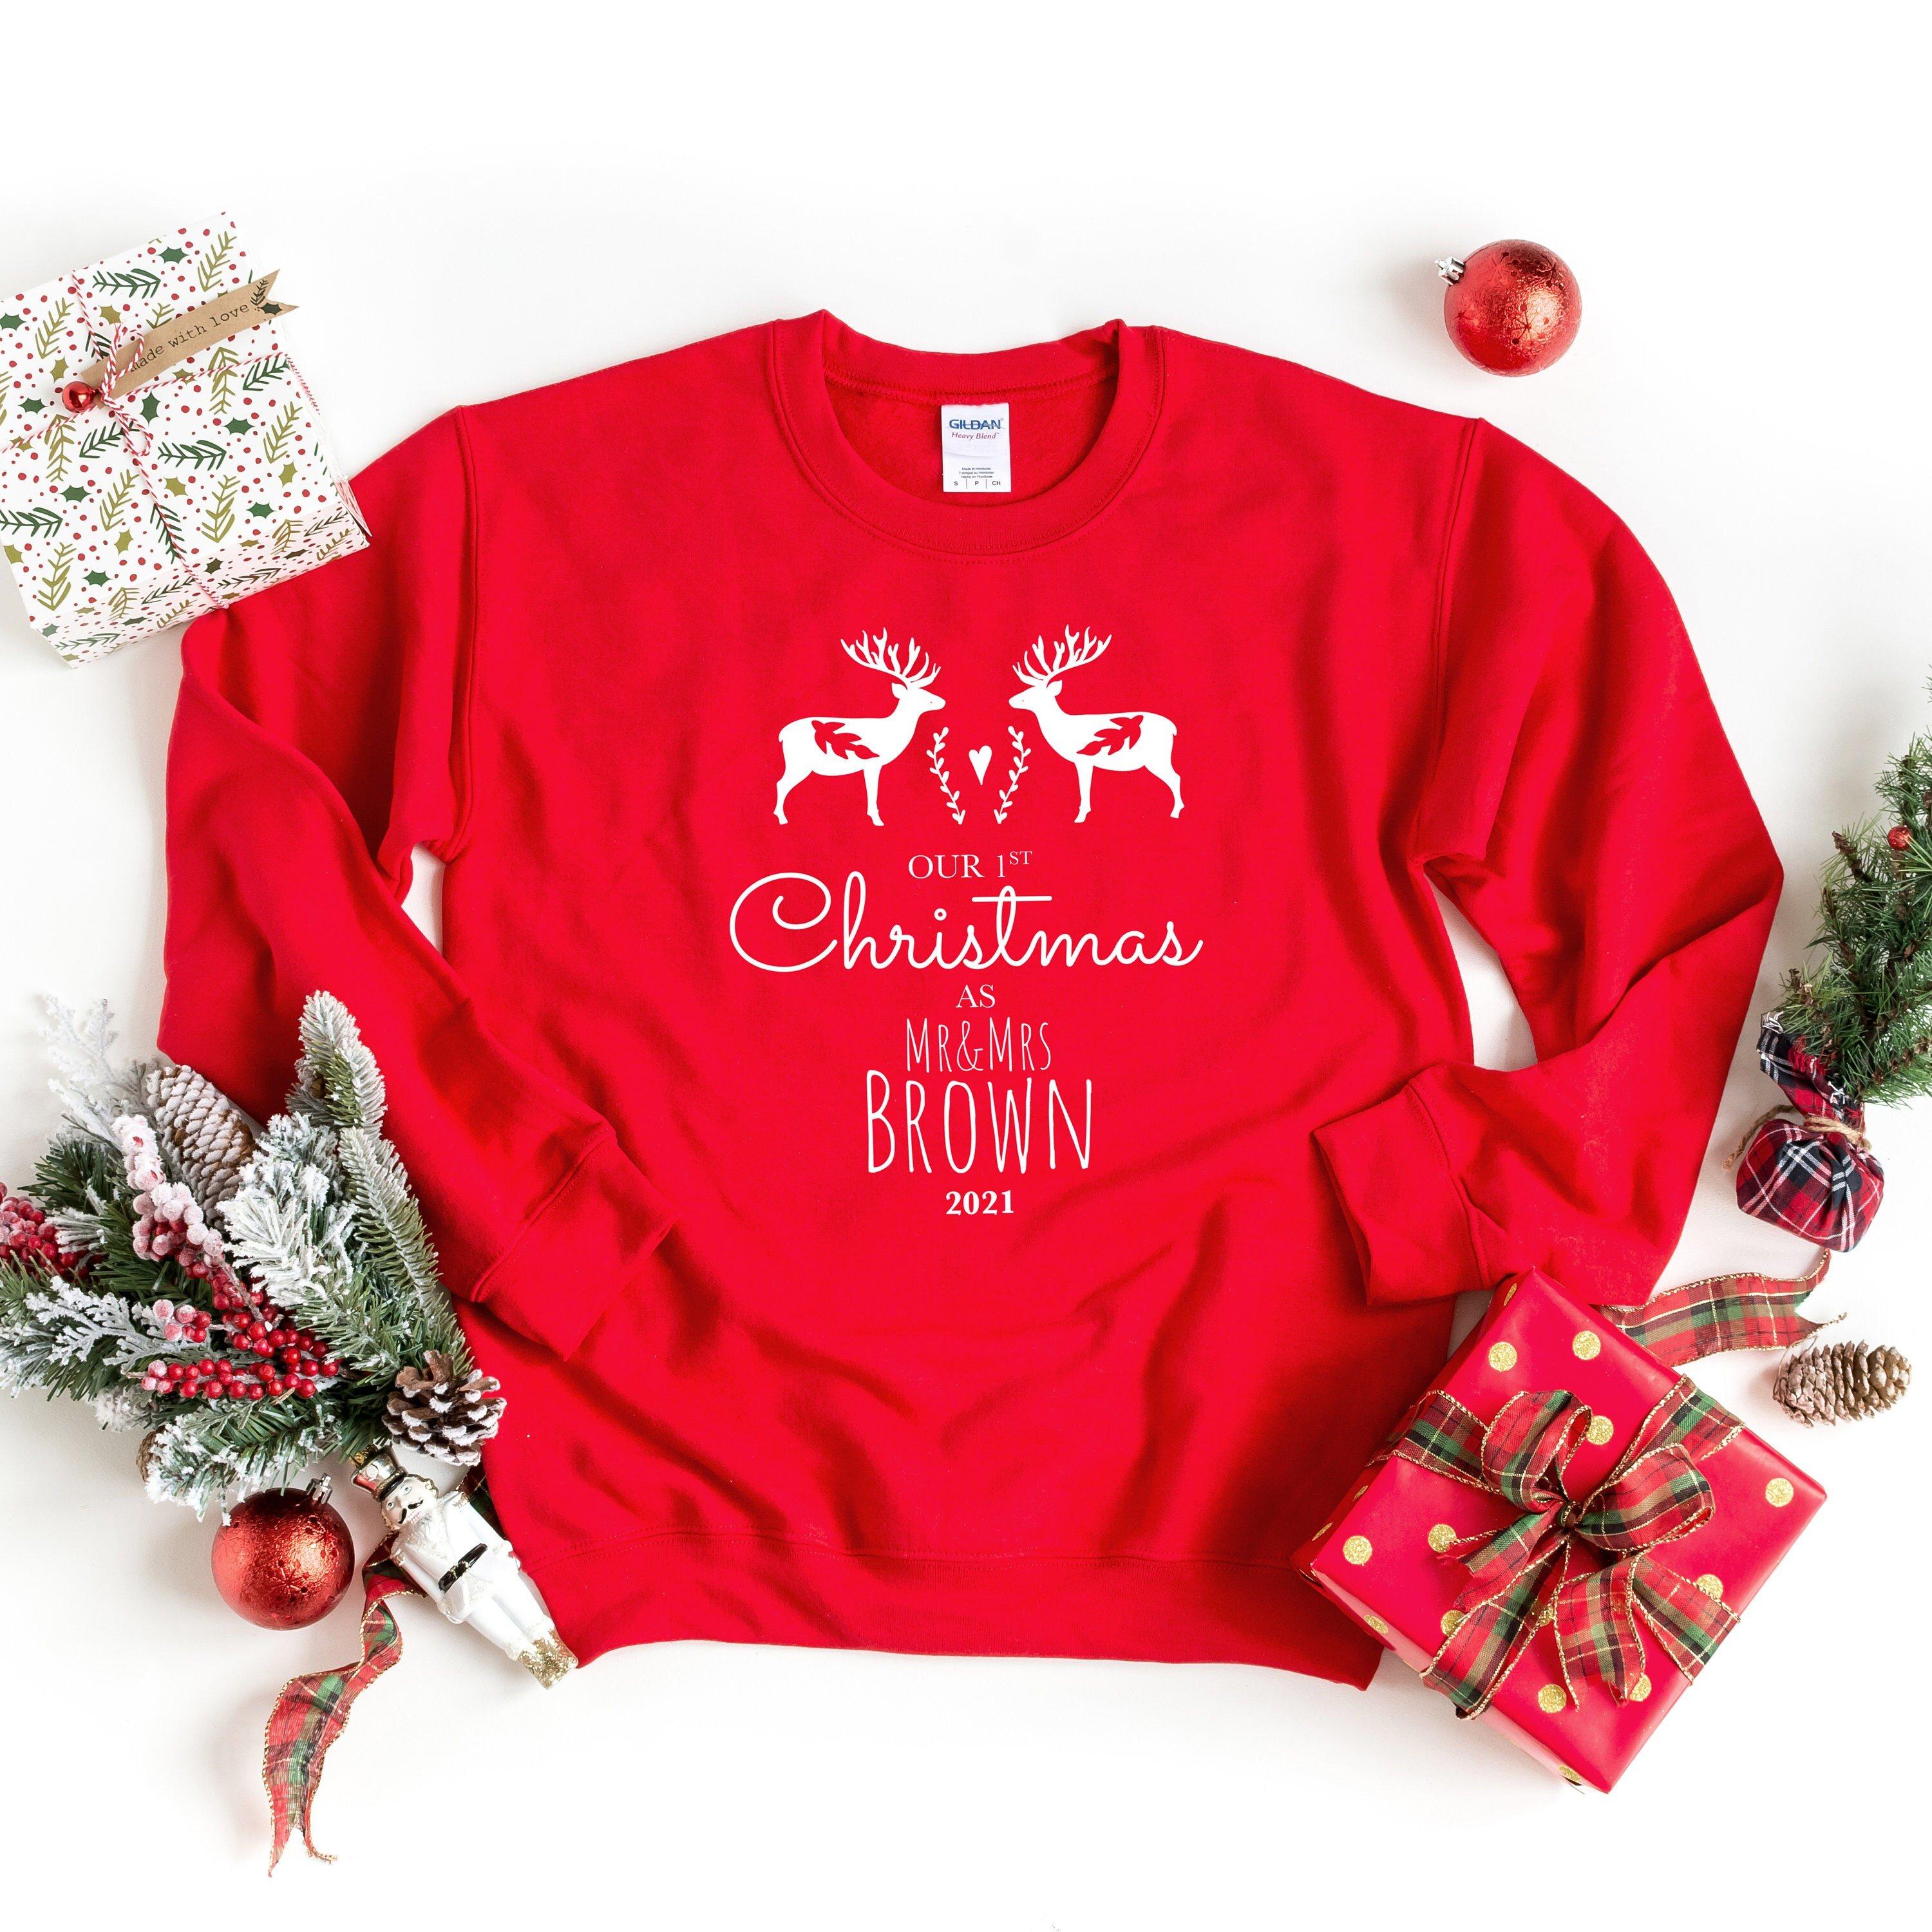 Personalised our first Christmas jumper as Mr & Mrs last name, Newlywed New Husband Wife